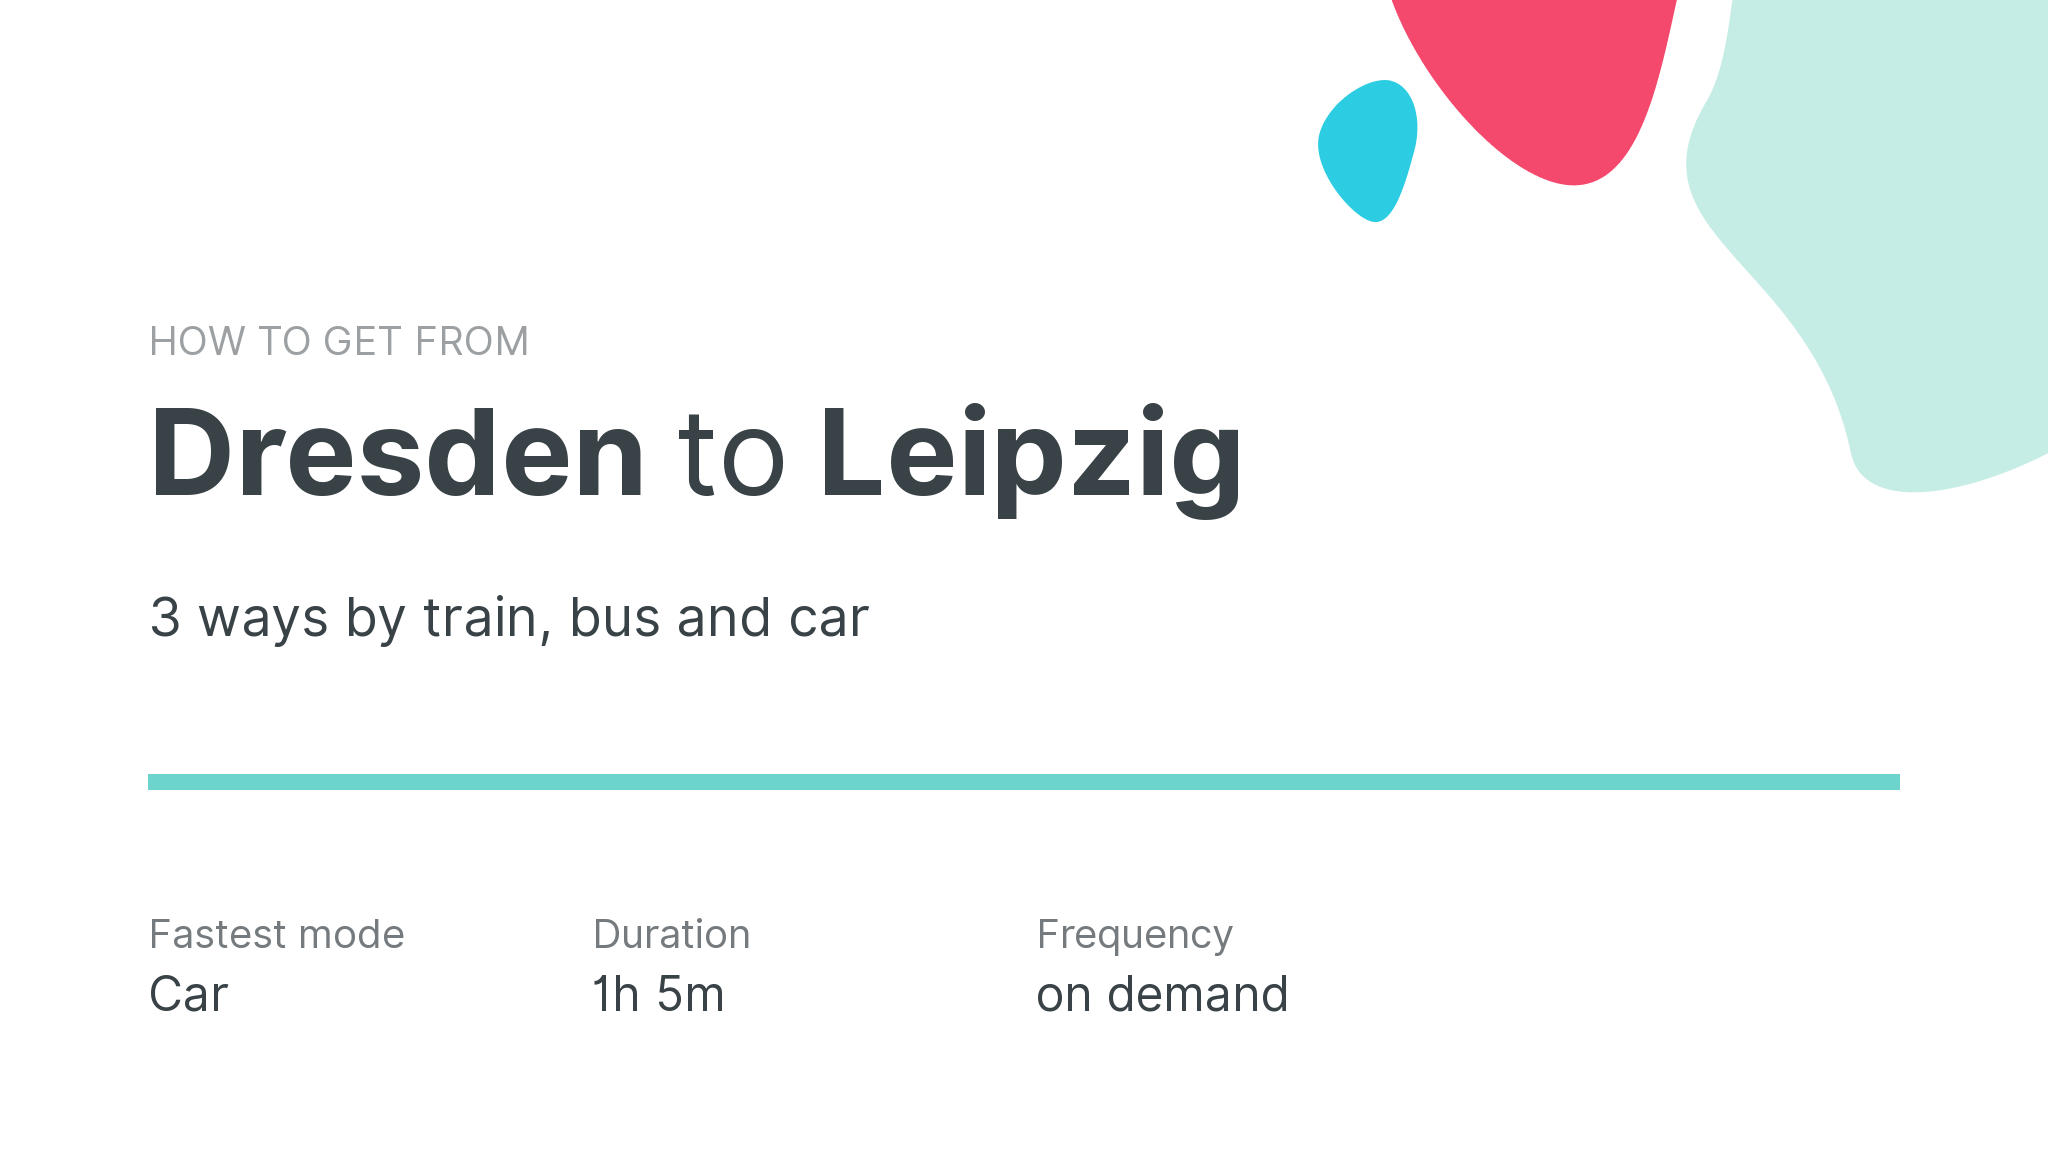 How do I get from Dresden to Leipzig